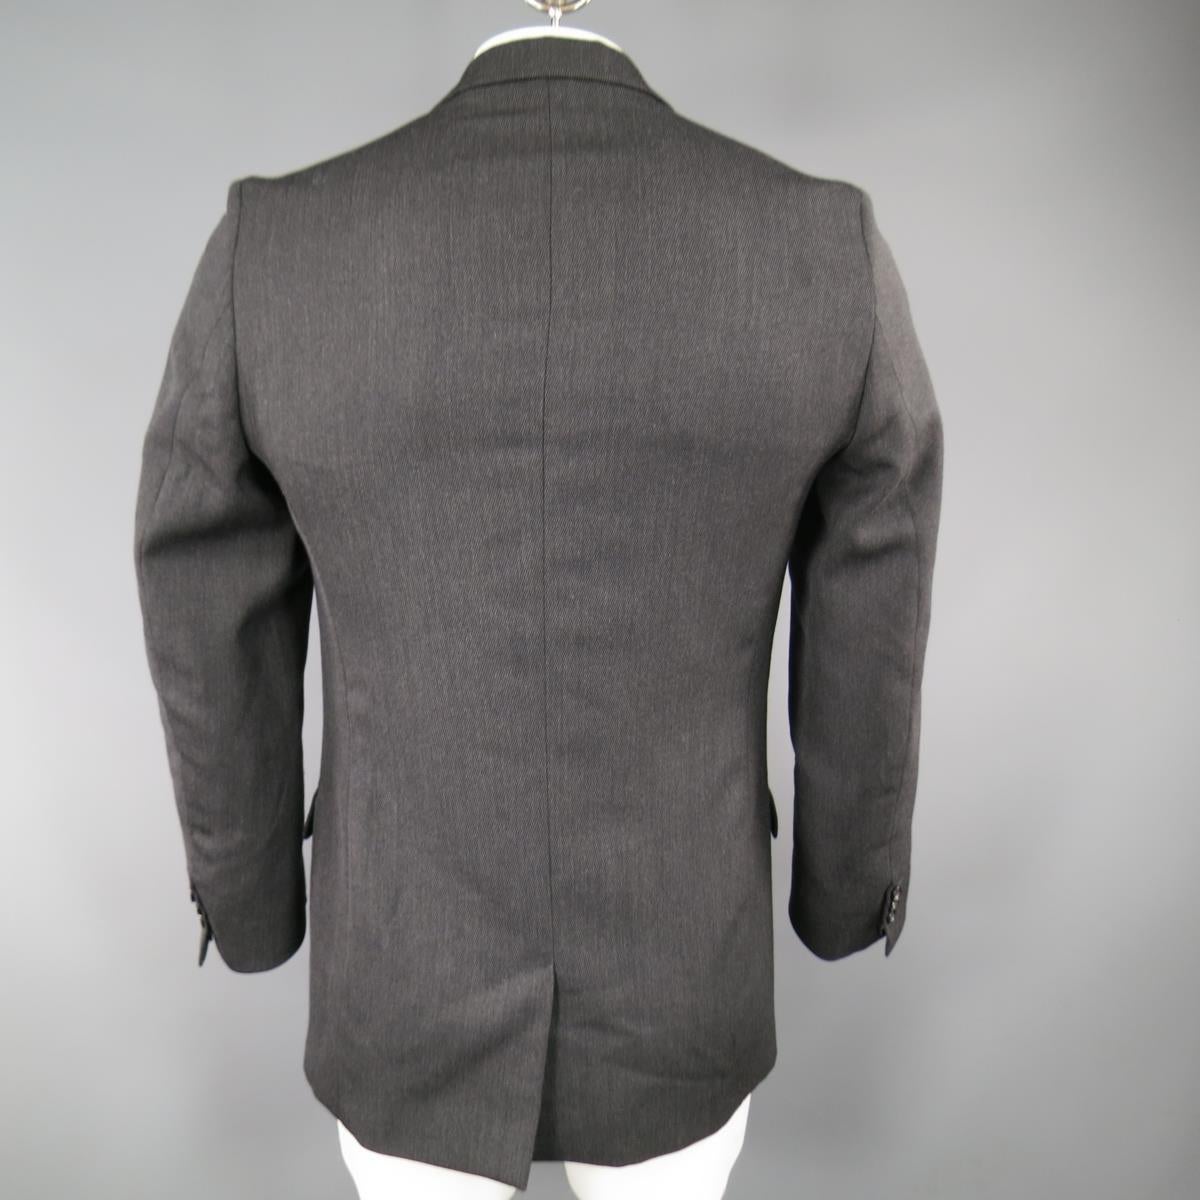 MAISON MARTIN MARGIELA Regular Charcoal Solid Wool Notch Lapel Sport Coat In Excellent Condition For Sale In San Francisco, CA